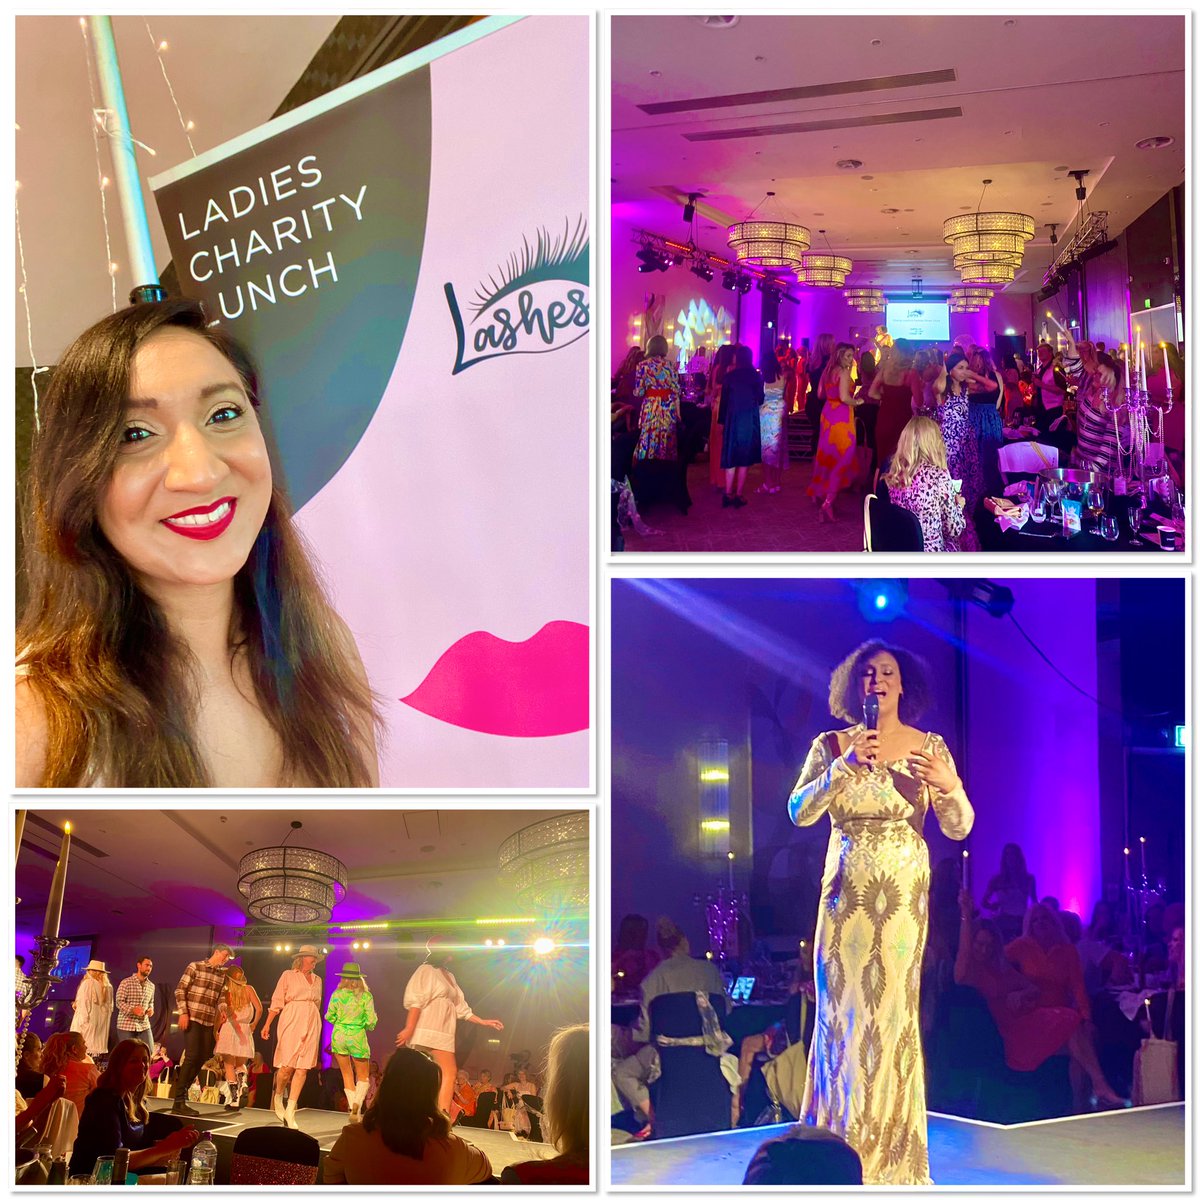 Great to attend the wonderful #Lashes event again this year! Amazing afternoon with amazing women, celebrating local talent and raising lots of money for the Hampshire Cricket Foundation - who do a great job within our local communities.